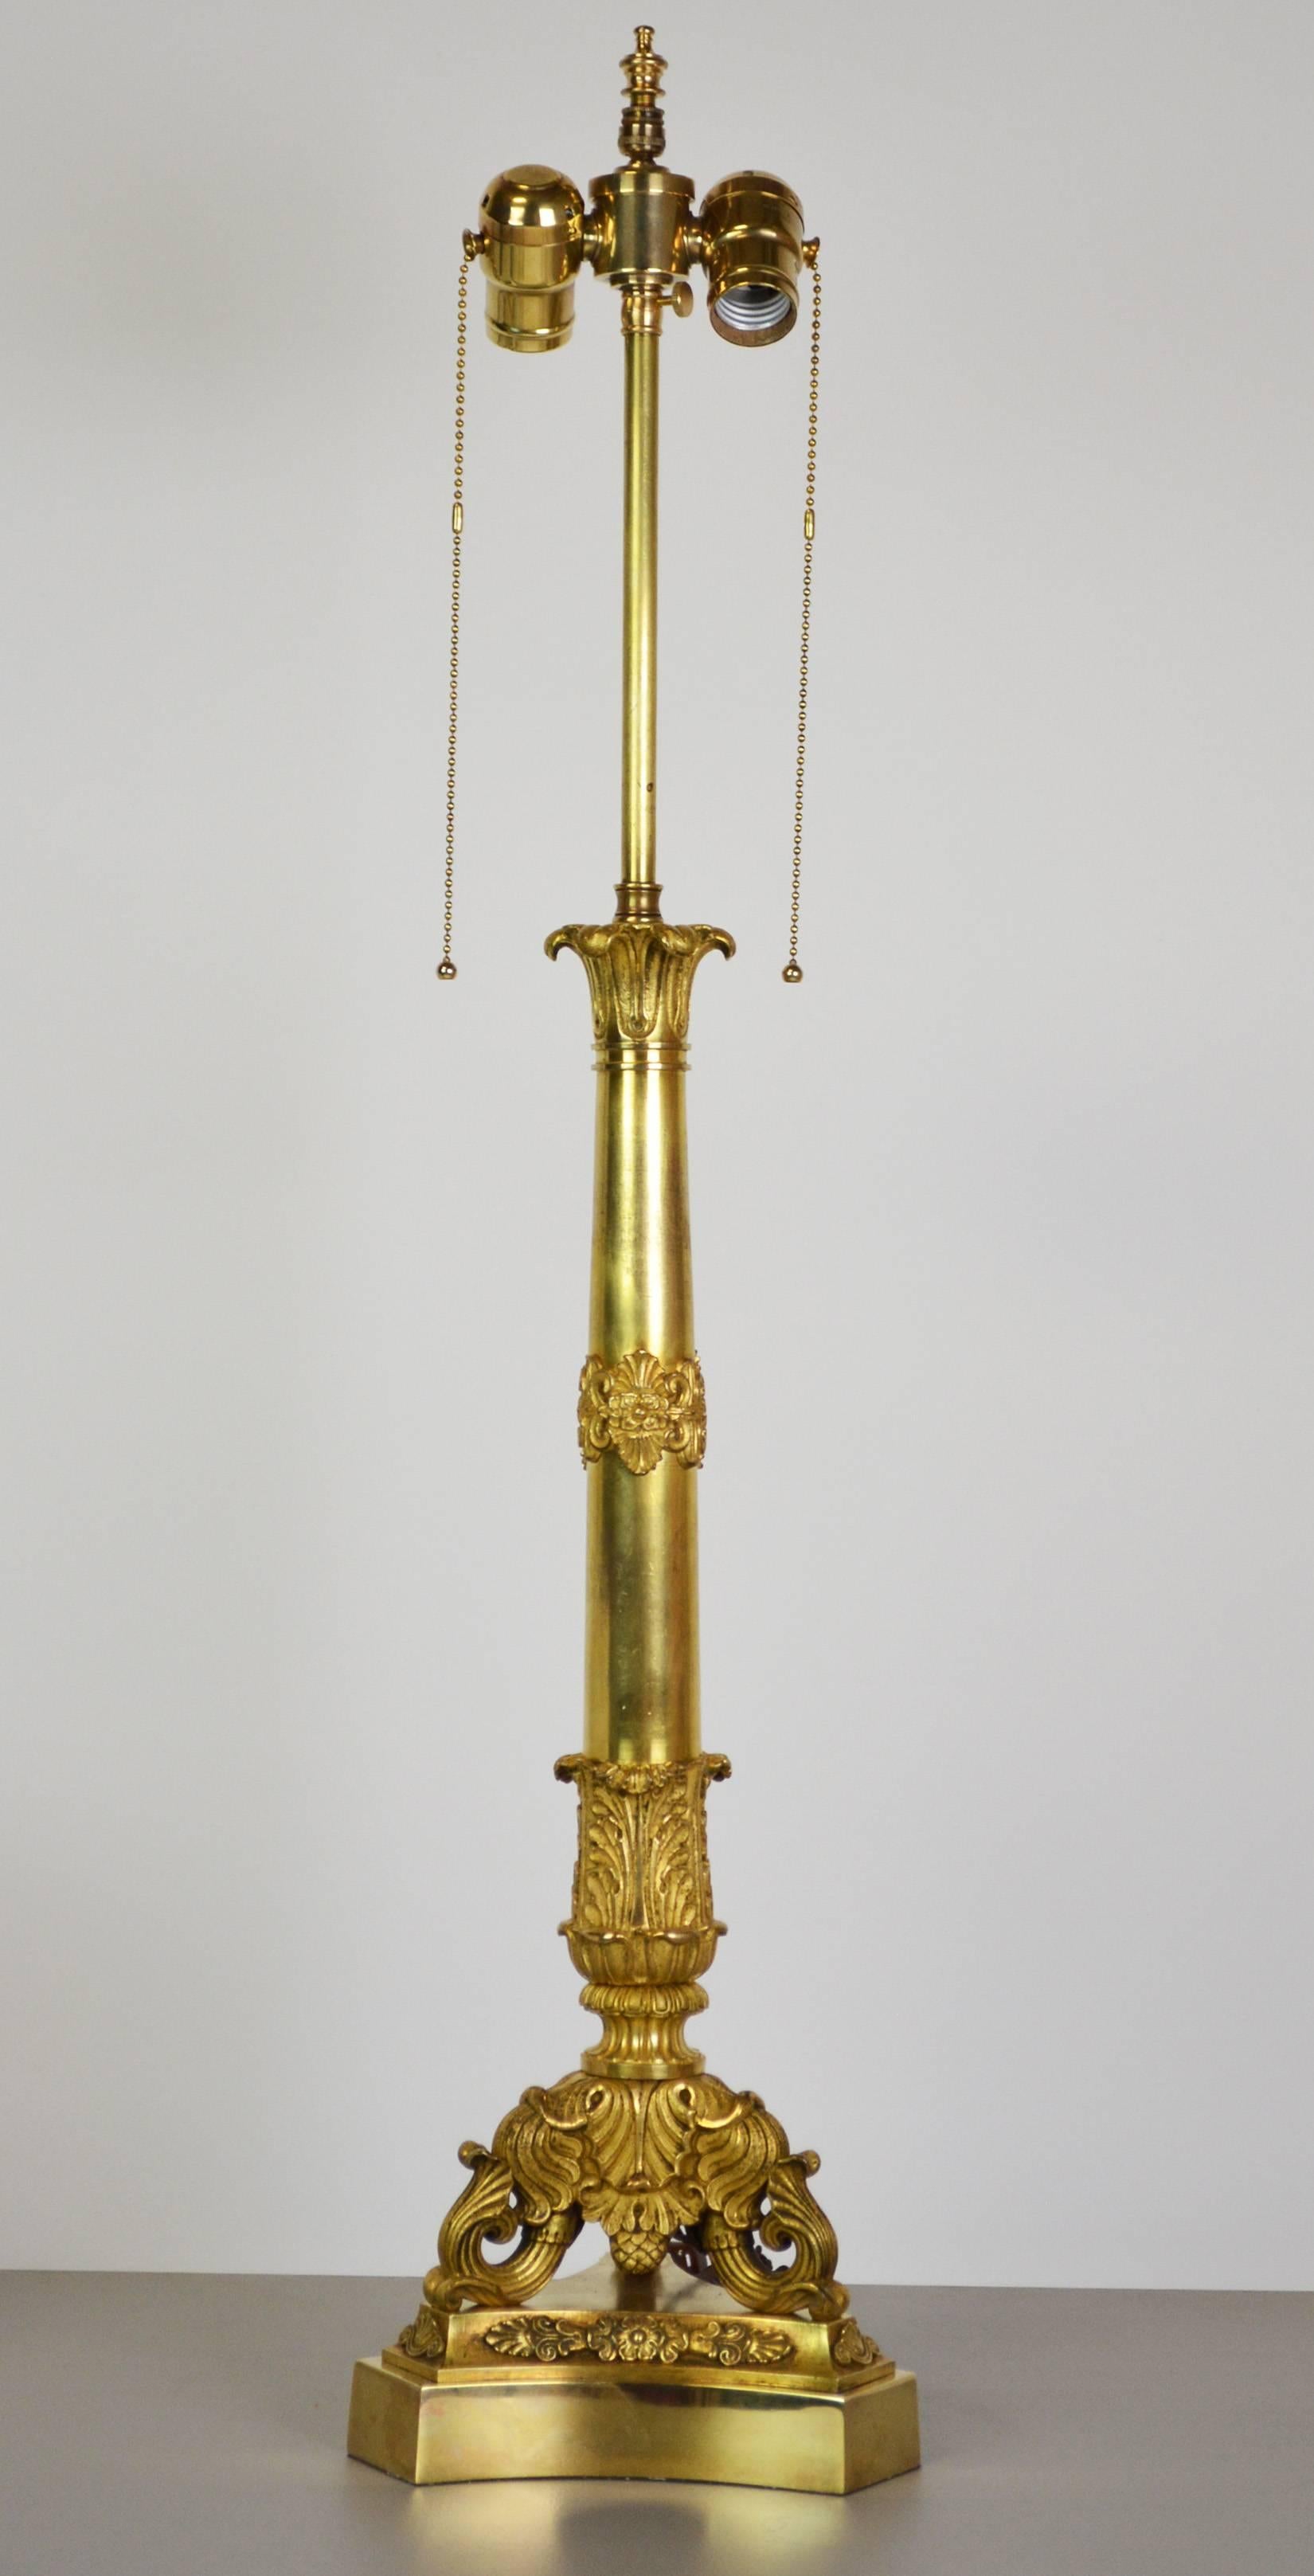 A great quality 19th century gilt bronze lamp with finely chased neoclassical detailing. Tripod base supports a tapered shaft with decorative mounts, surmounted by a 'petal' form top.21.5" to top of decorative bronze doré shaft, 34"